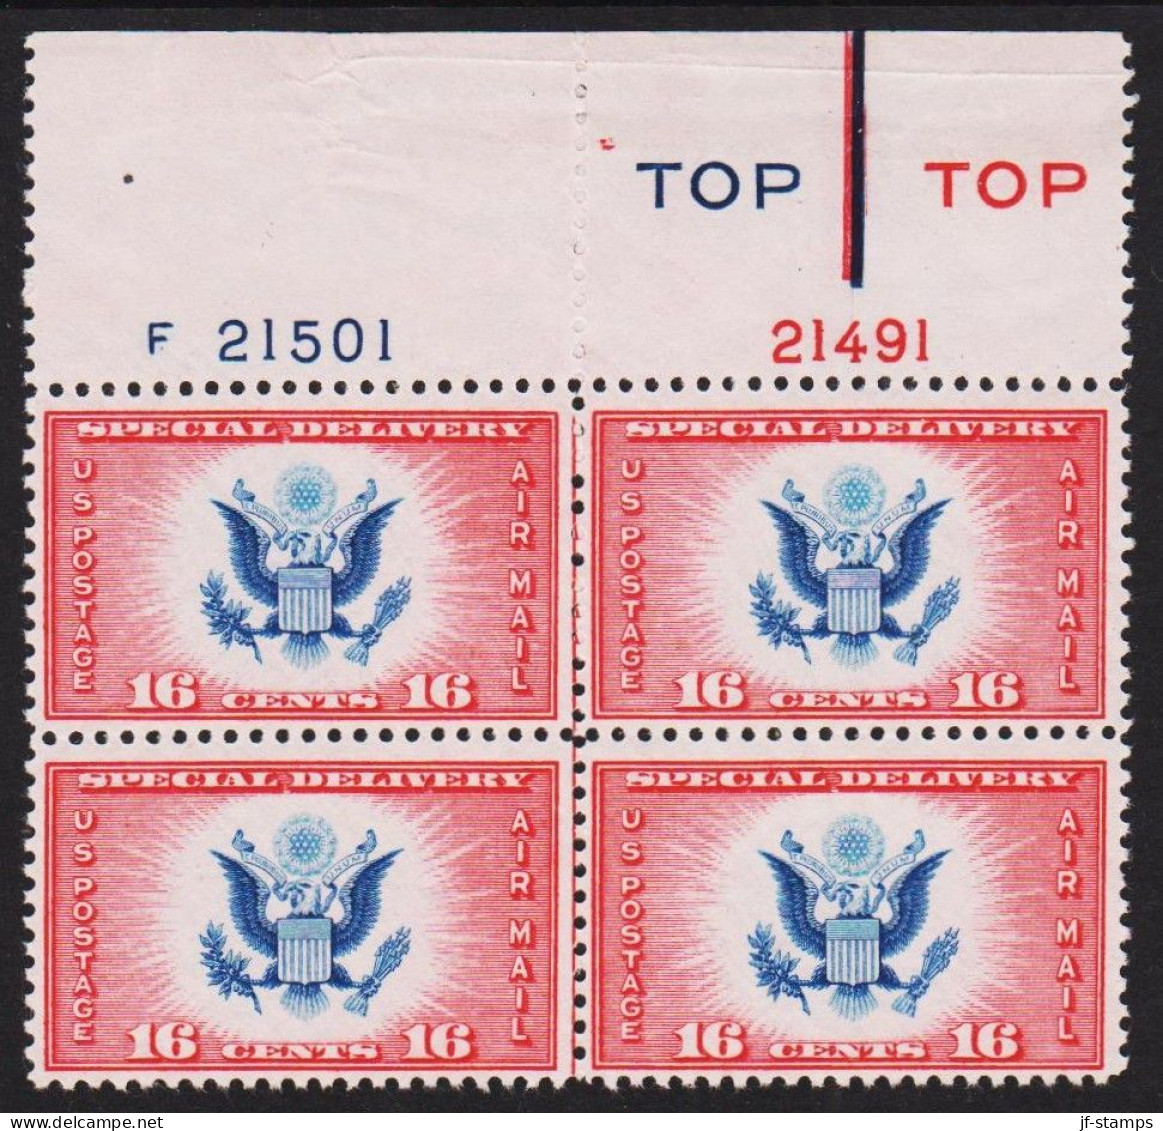 1936. USA. SPECIAL DELIVERY 16 CENTS 16. AIR MAIL, 4block Never Hinged.  Platenumber 21501 And 21491.  - JF542824 - Nuovi